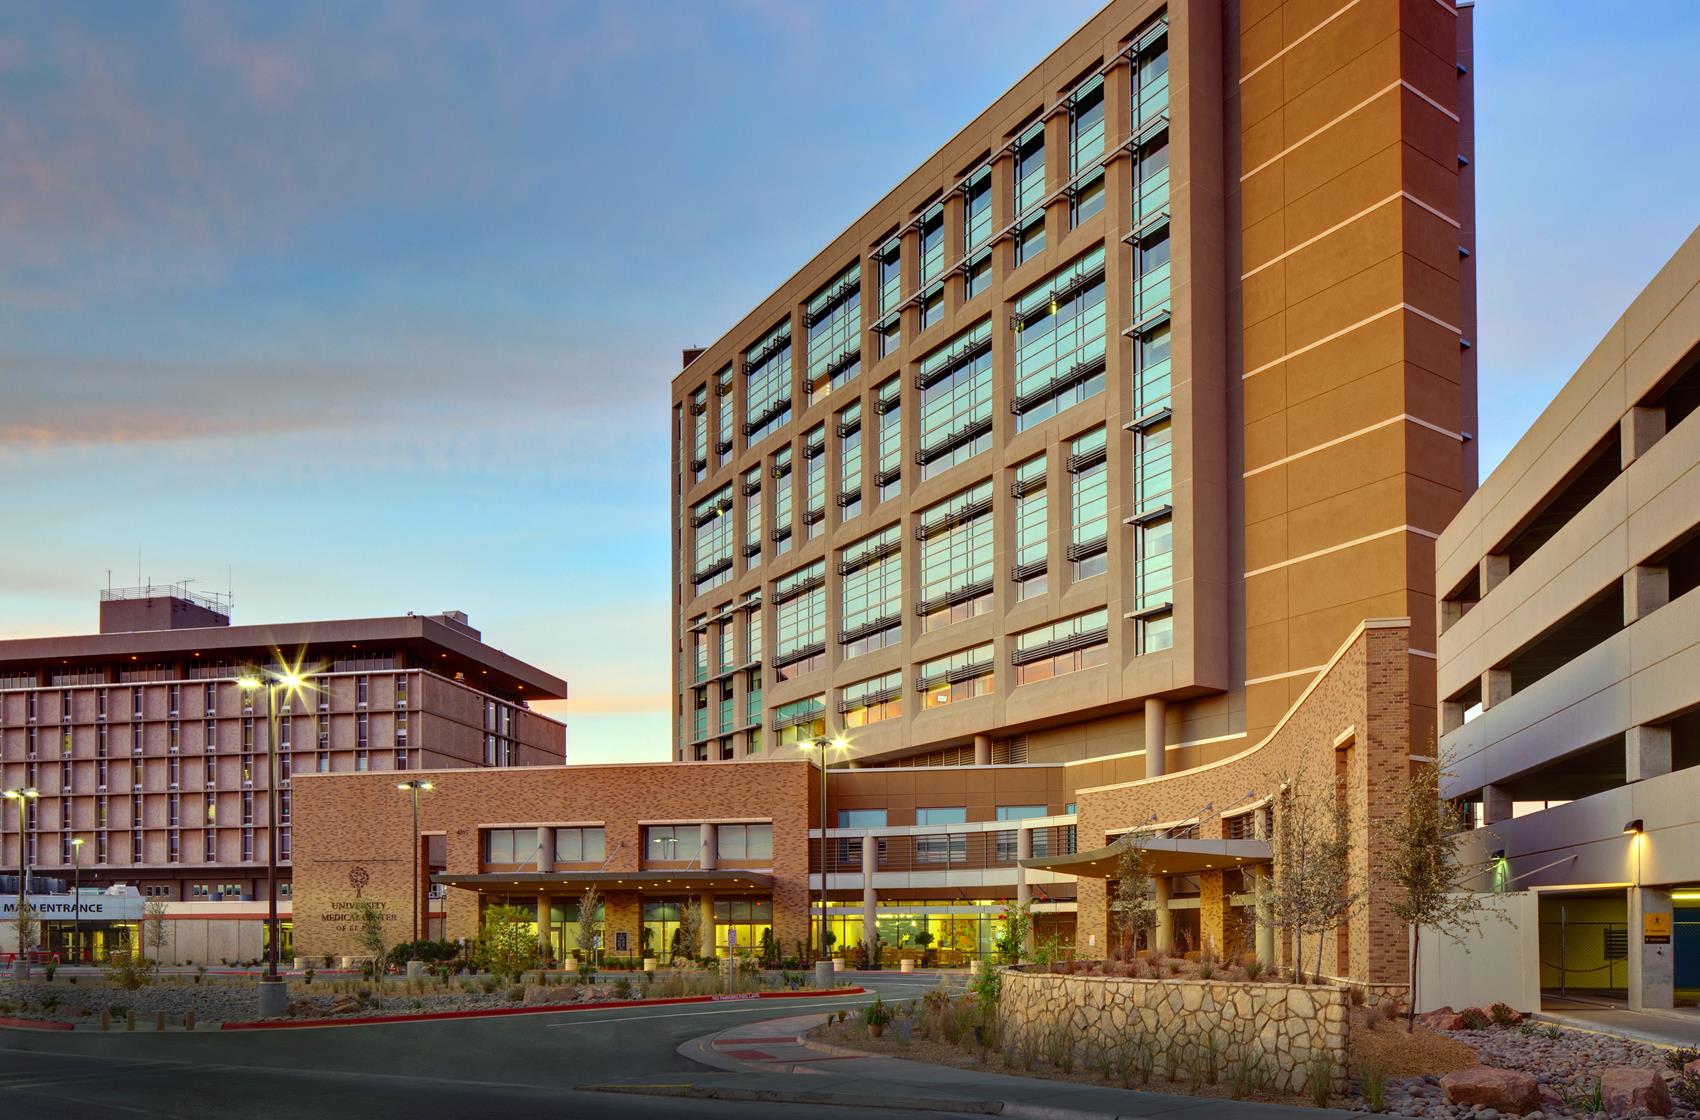 Exterior view of the University Medical Center of El Paso